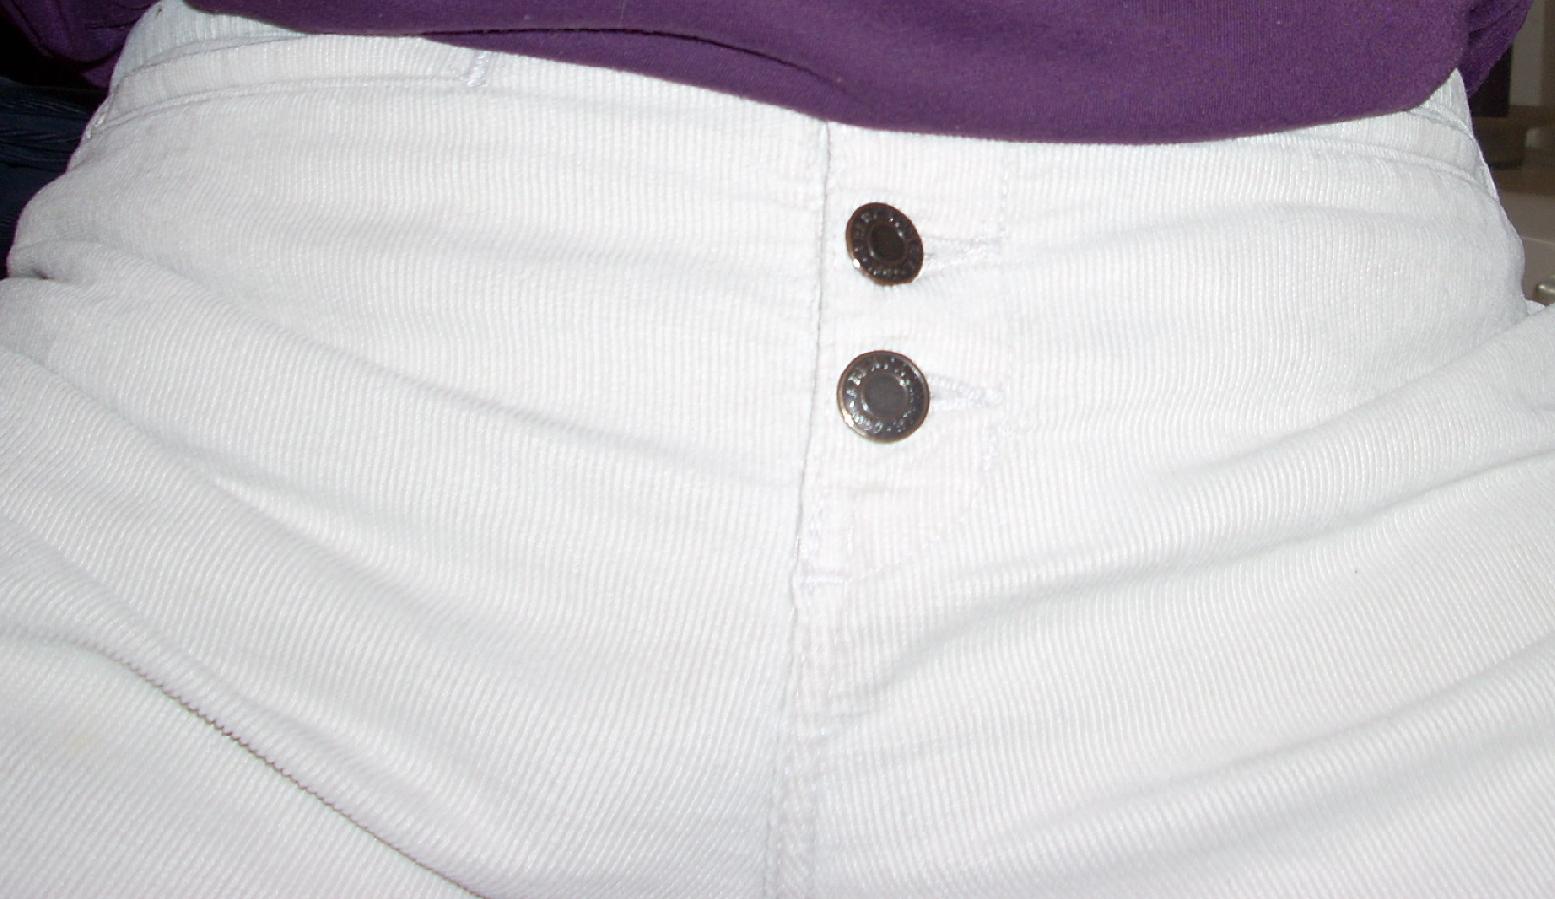 exposed button 09.jpg